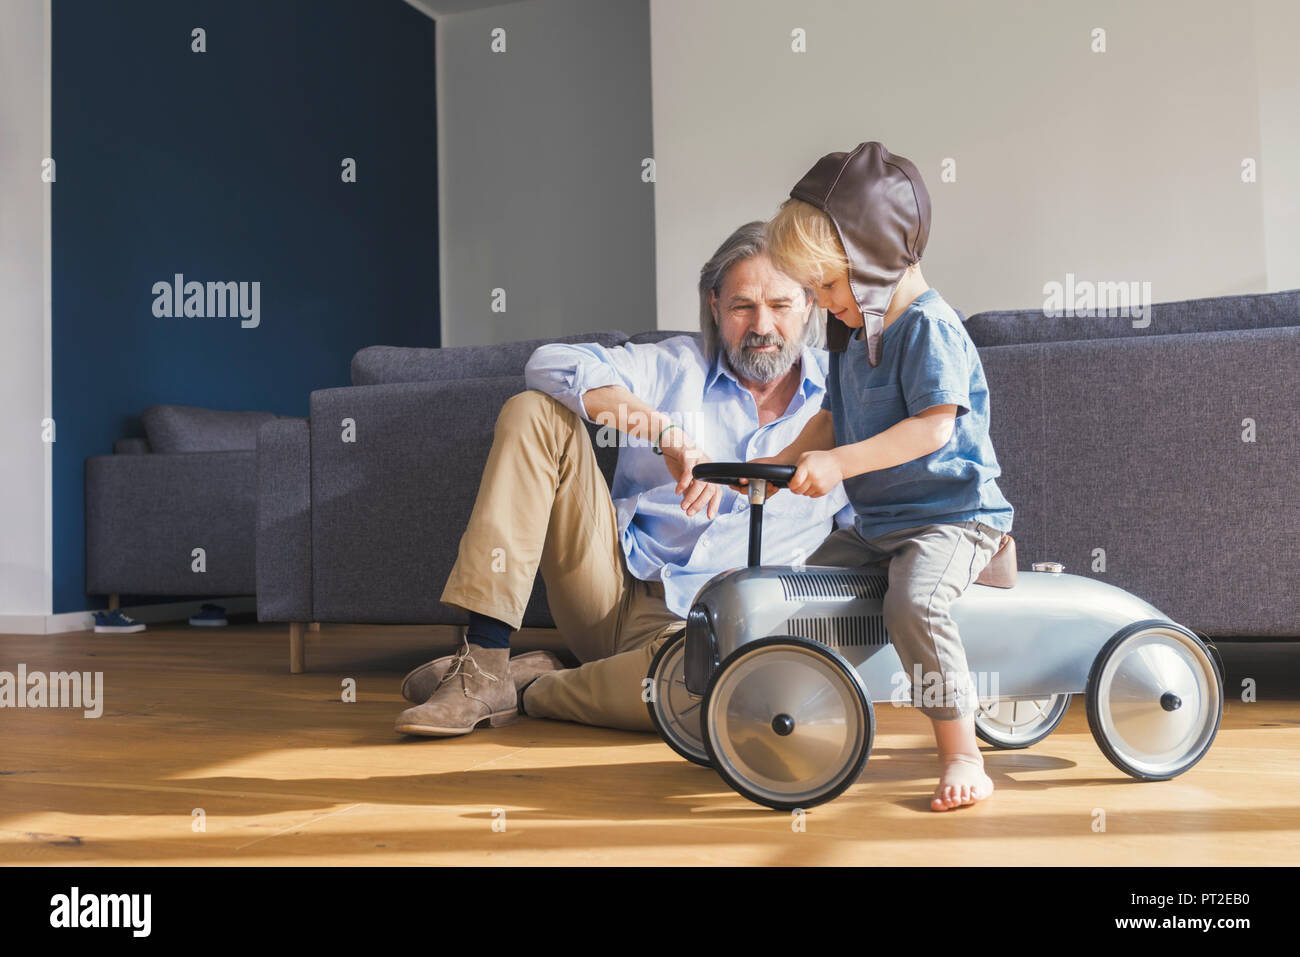 Grandfather playing with grandson, sitting on toy car Stock Photo